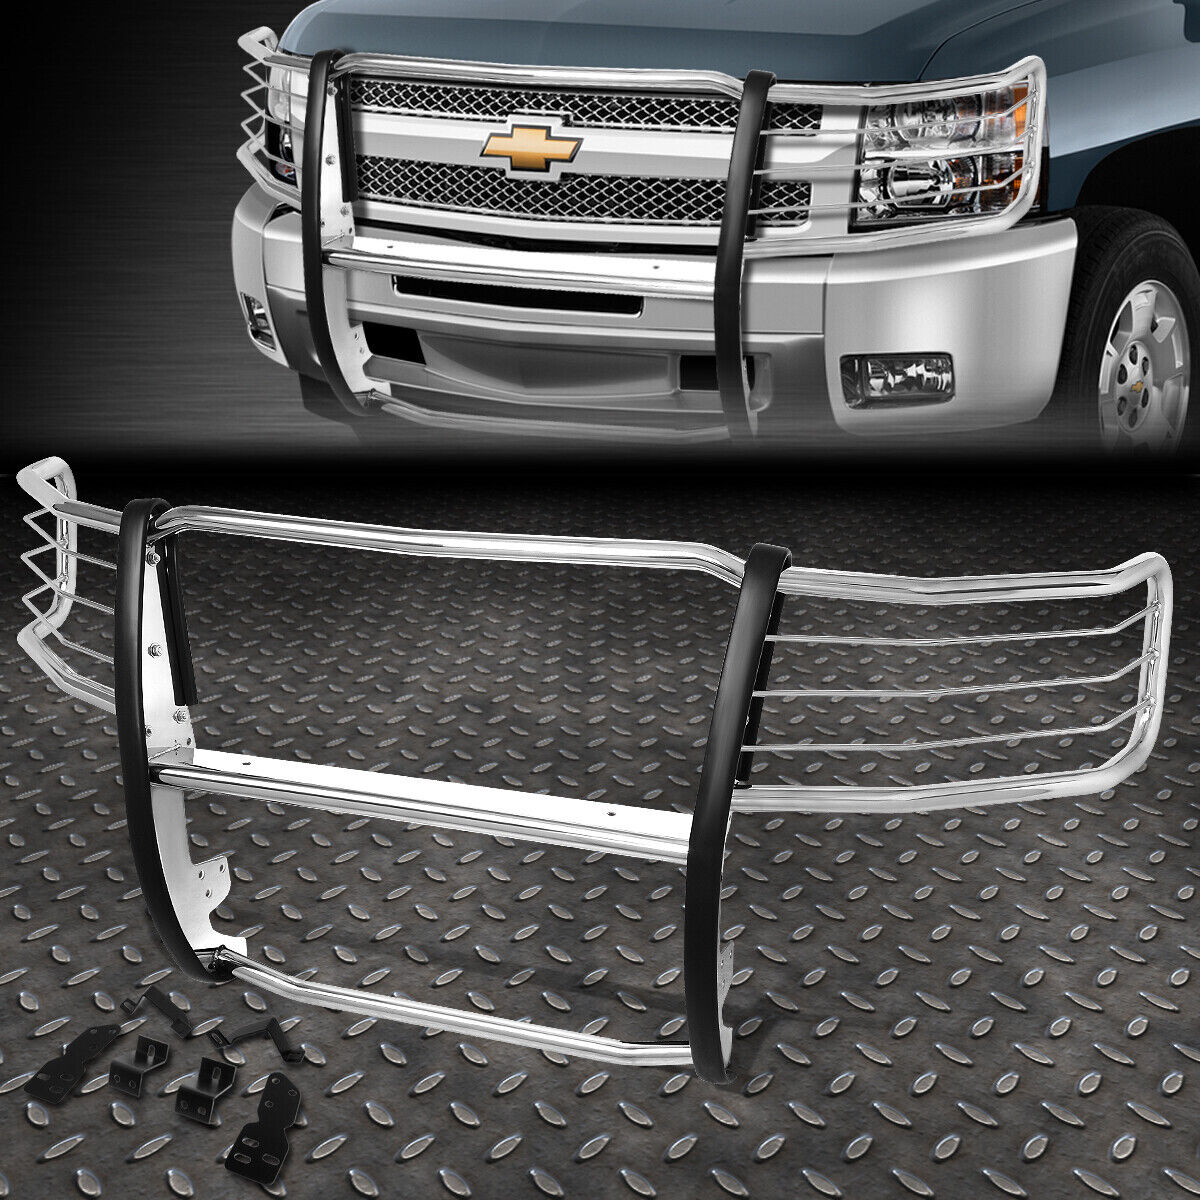 FOR 07-13 CHEVY SILVERADO 1500 STAINLESS STEEL FRONT BUMPER BRUSH GRILLE GUARD